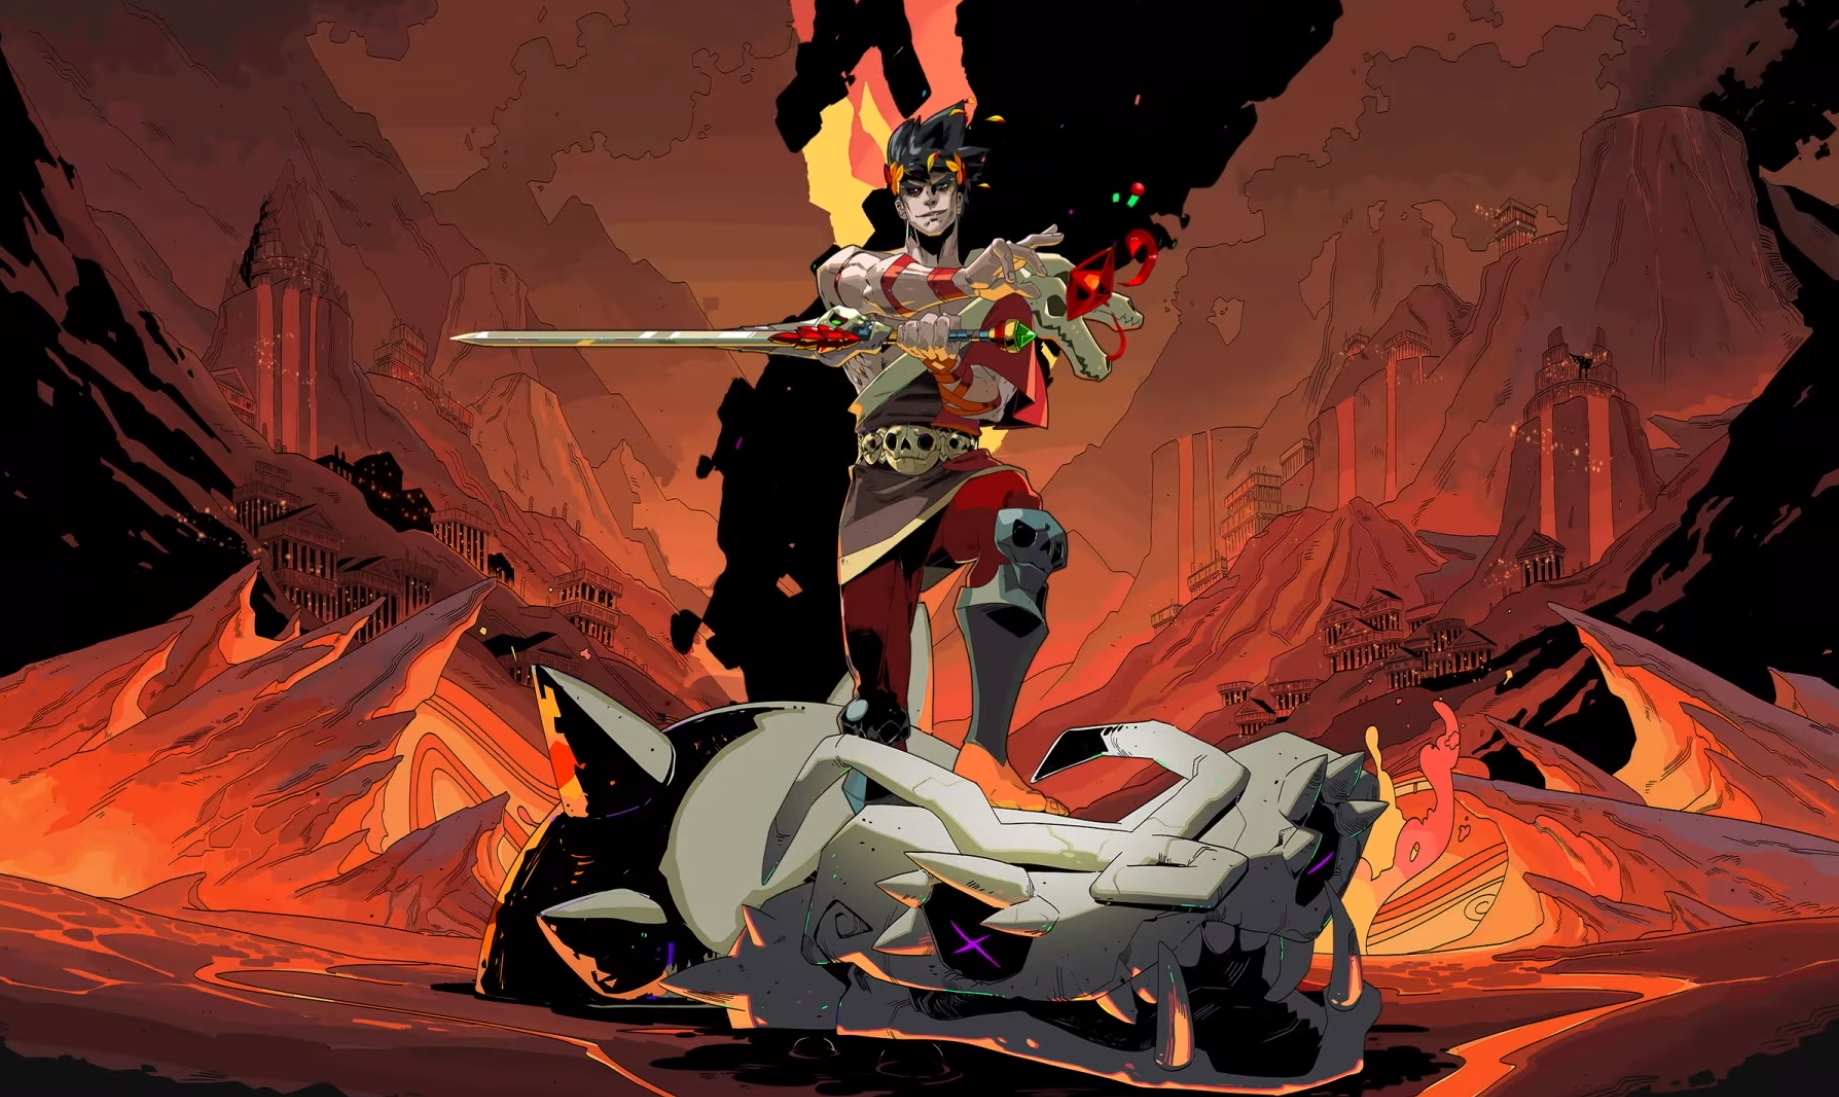 Zagreus poses with his sword, his boot crushing the skull of a skeletal snake.